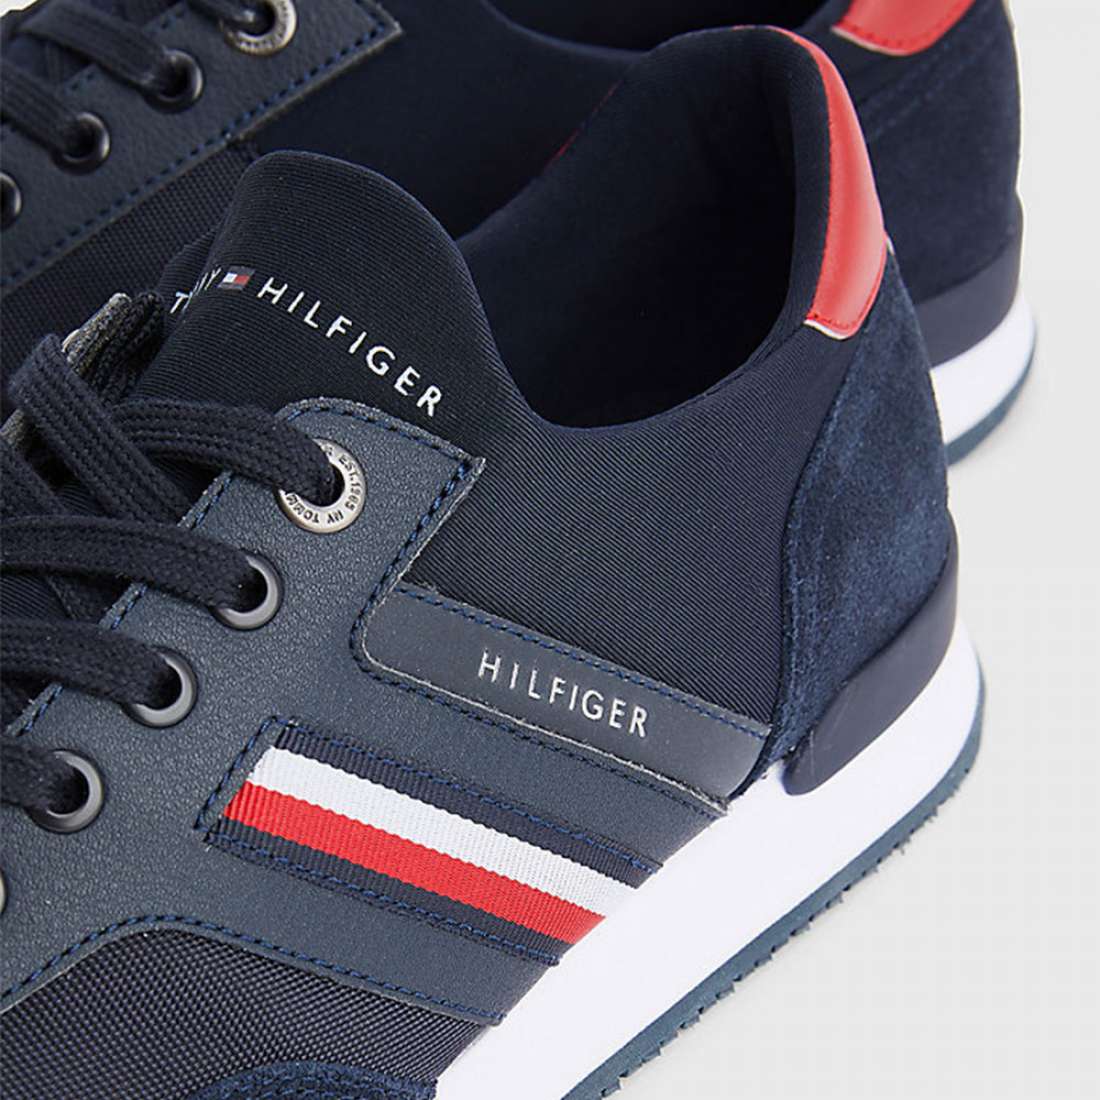 TOMMY HILFIGER ICONIC TRAINERS DESERT SKY